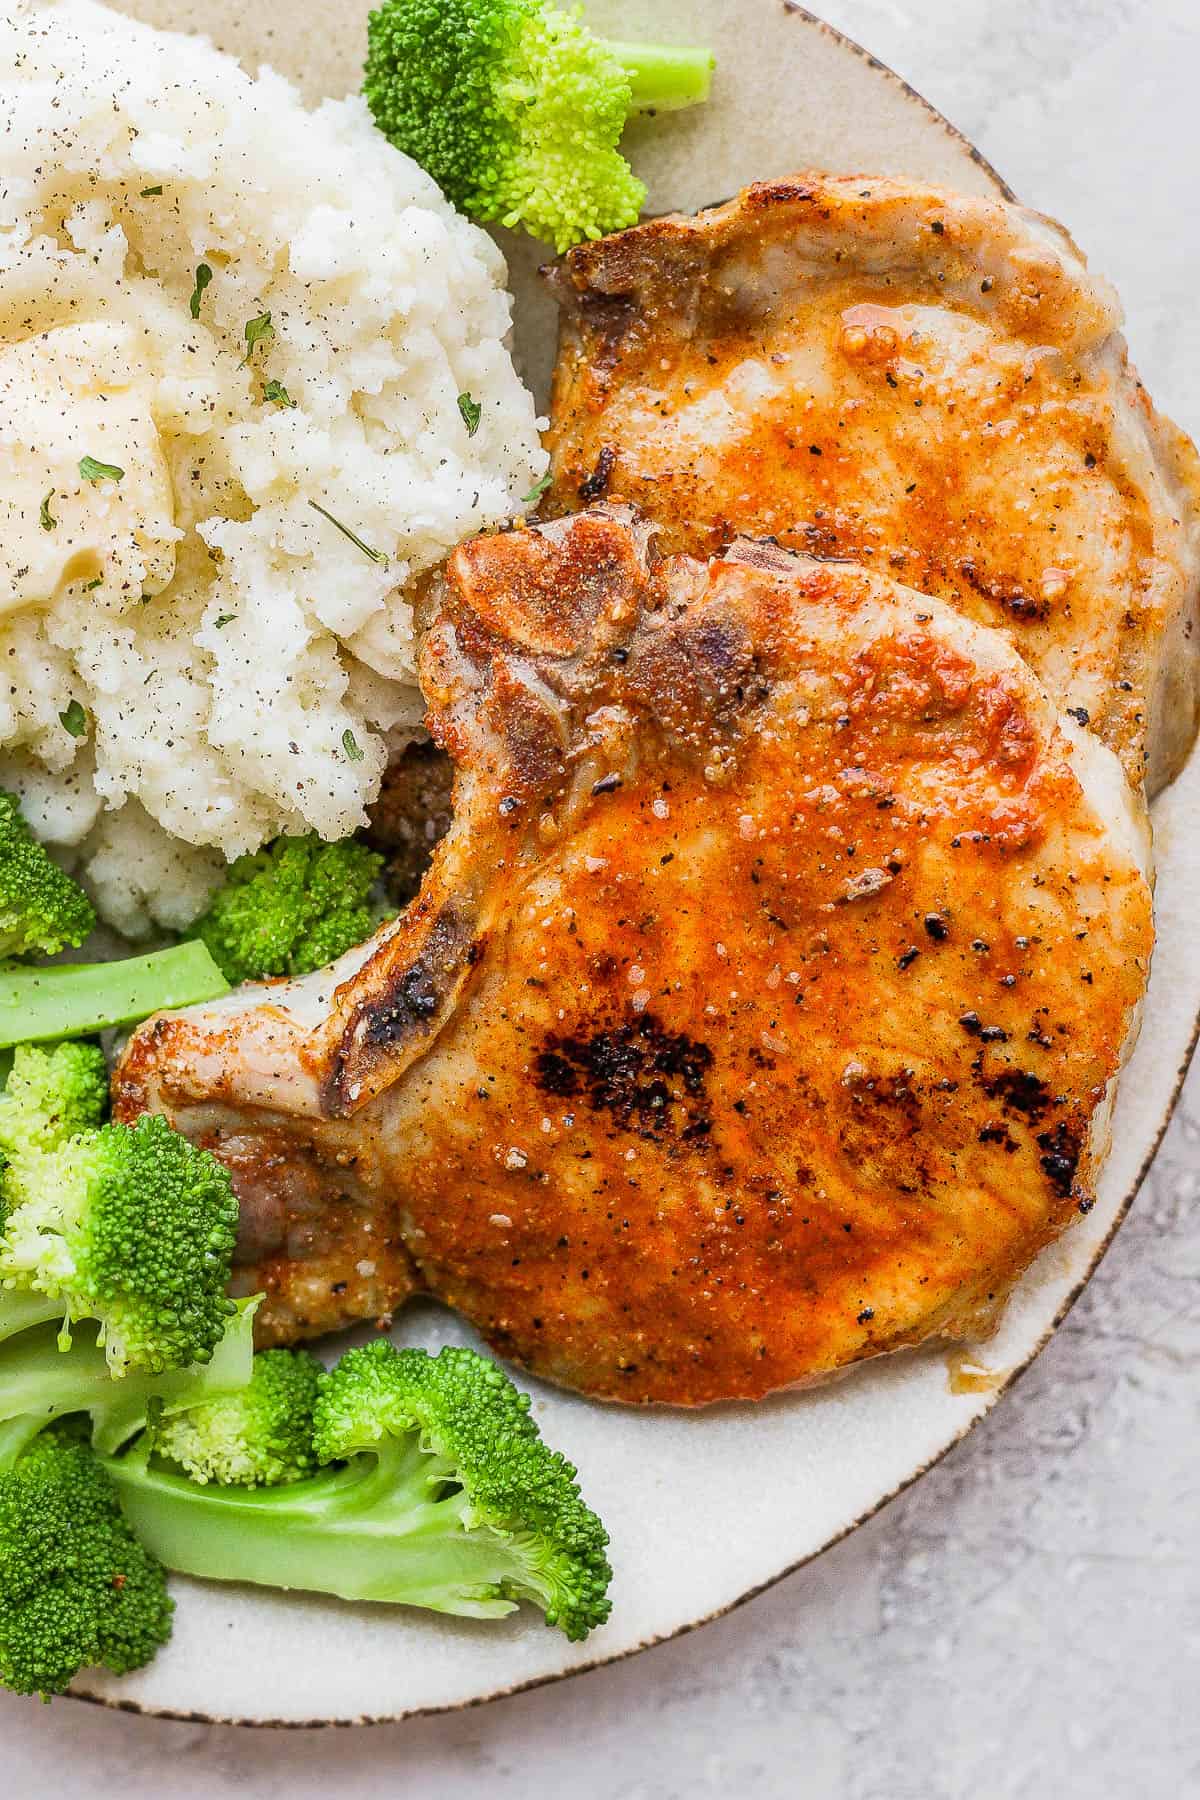 Baked pork chops on a plate with side dishes of mashed potatoes and broccoli. 